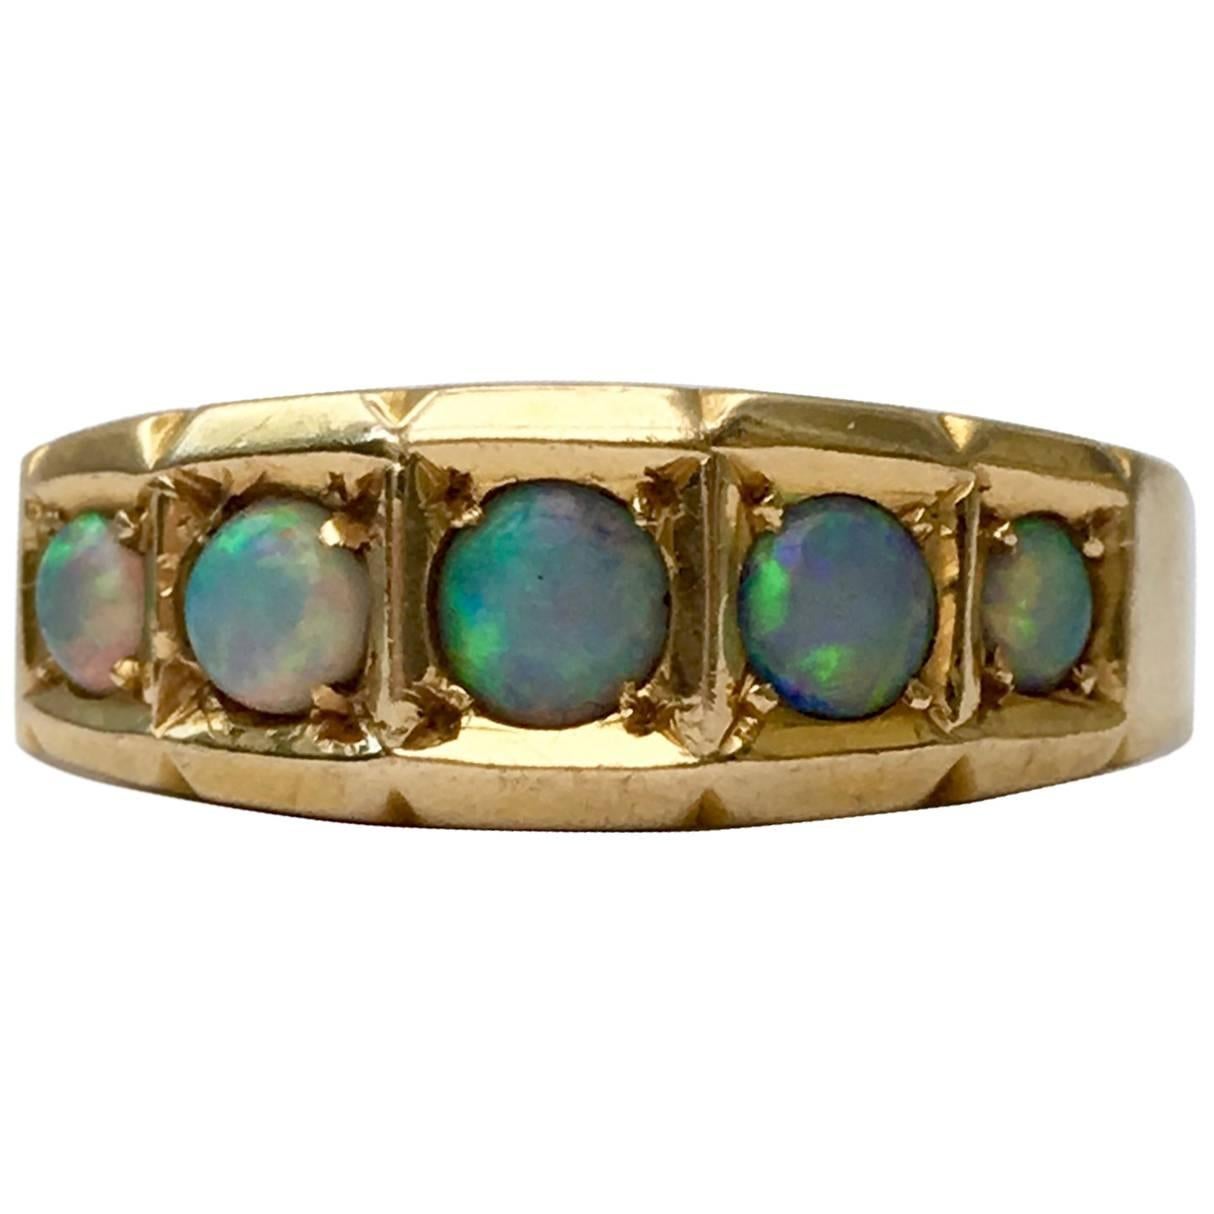 Opal Ring 18 Carat Gold Vintage Jewelry Five-Stone Band Victorian Antique Rings